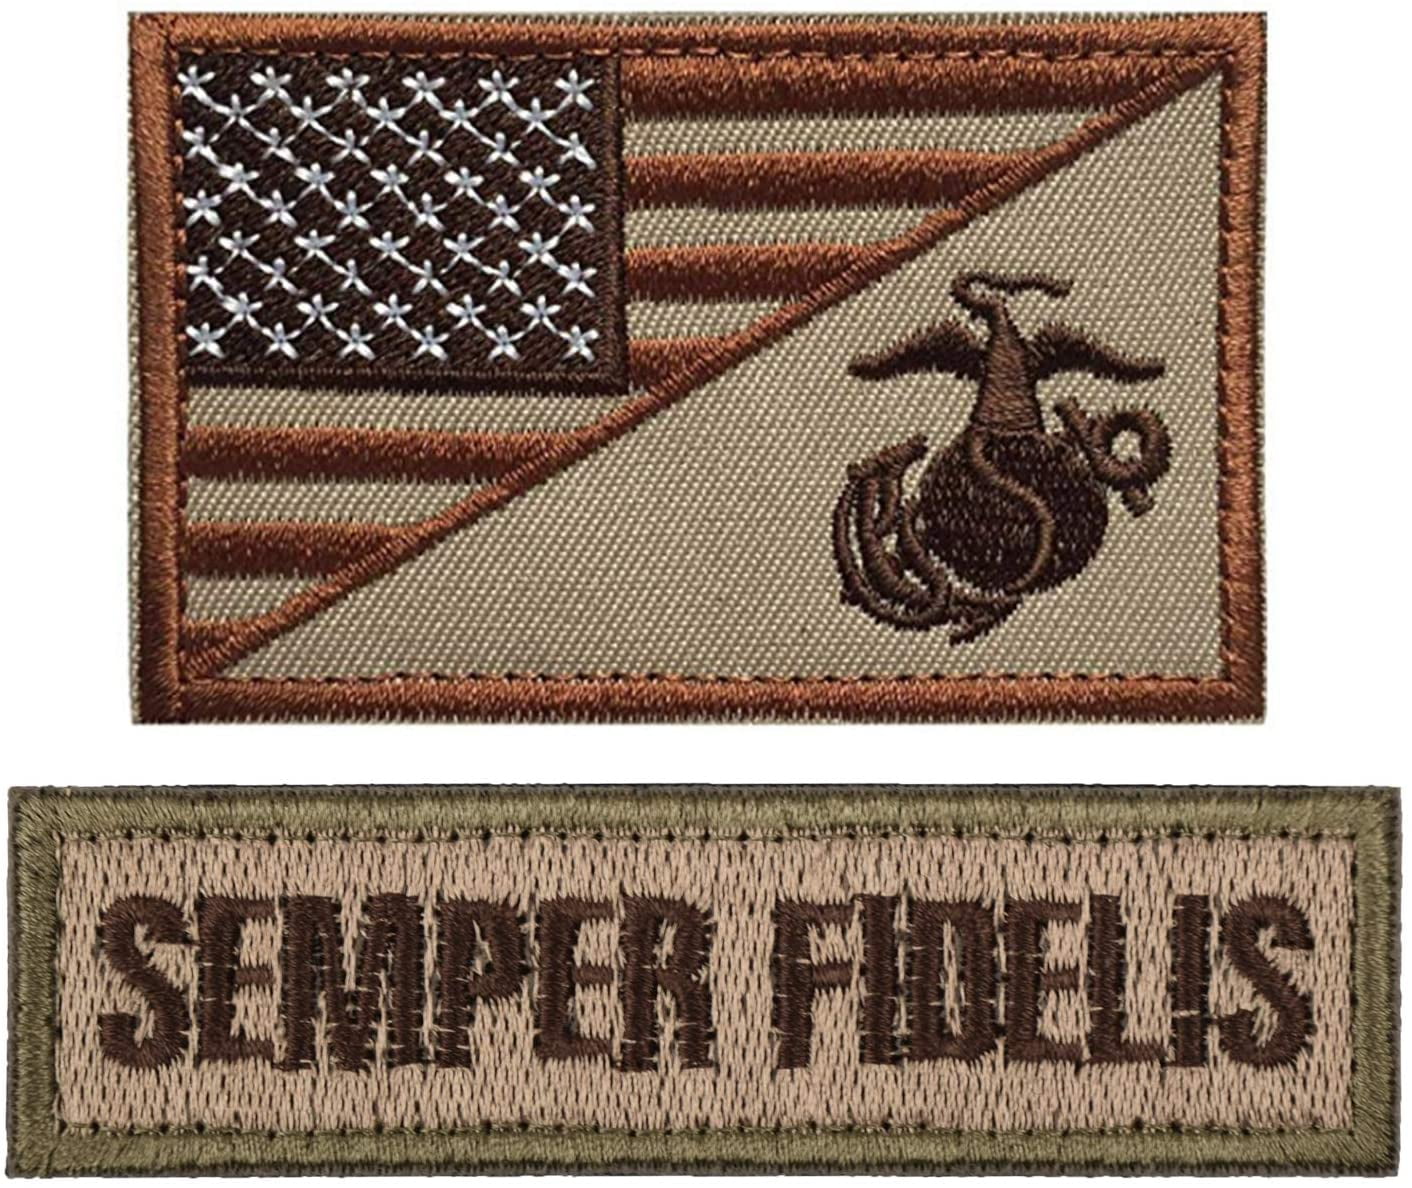 ELLEWIN USA Marine Corps USMC Patch Semper Fidelis Embroidery Patch Military Tactical Morale Badge Patch Hook and Loop 